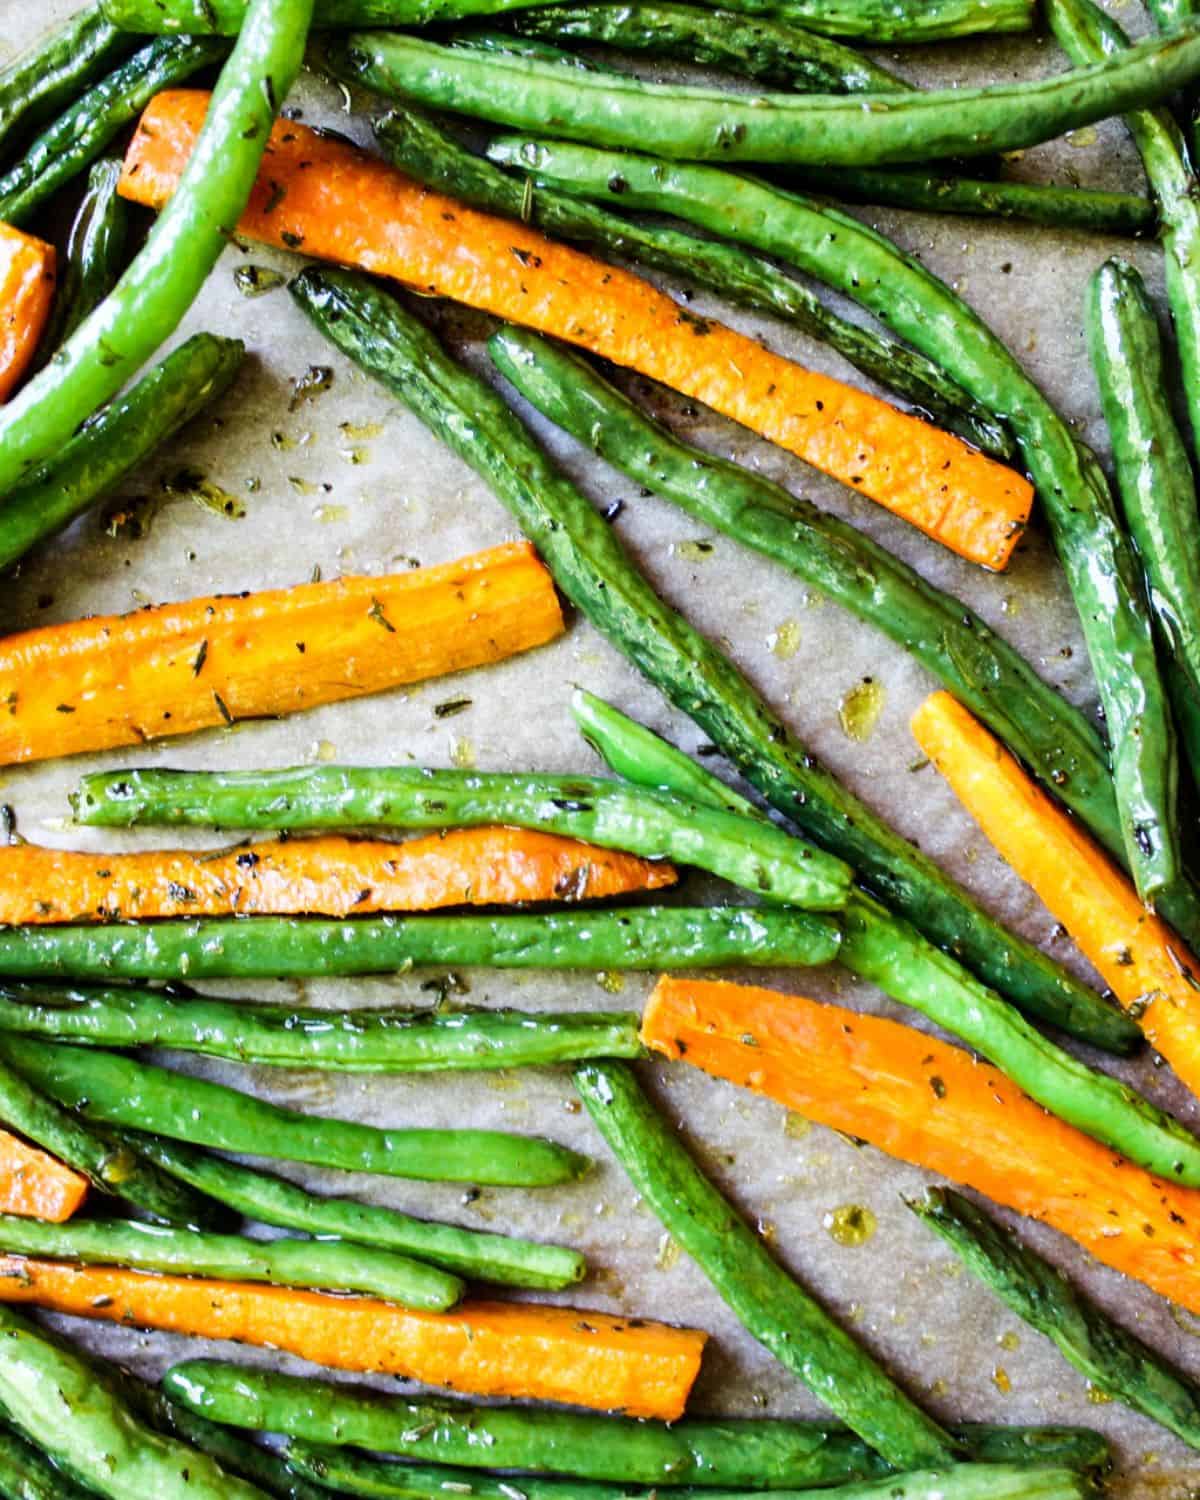 Roasted carrot sticks and green beans with dry herbs and coated in oil on yellow parchment paper.